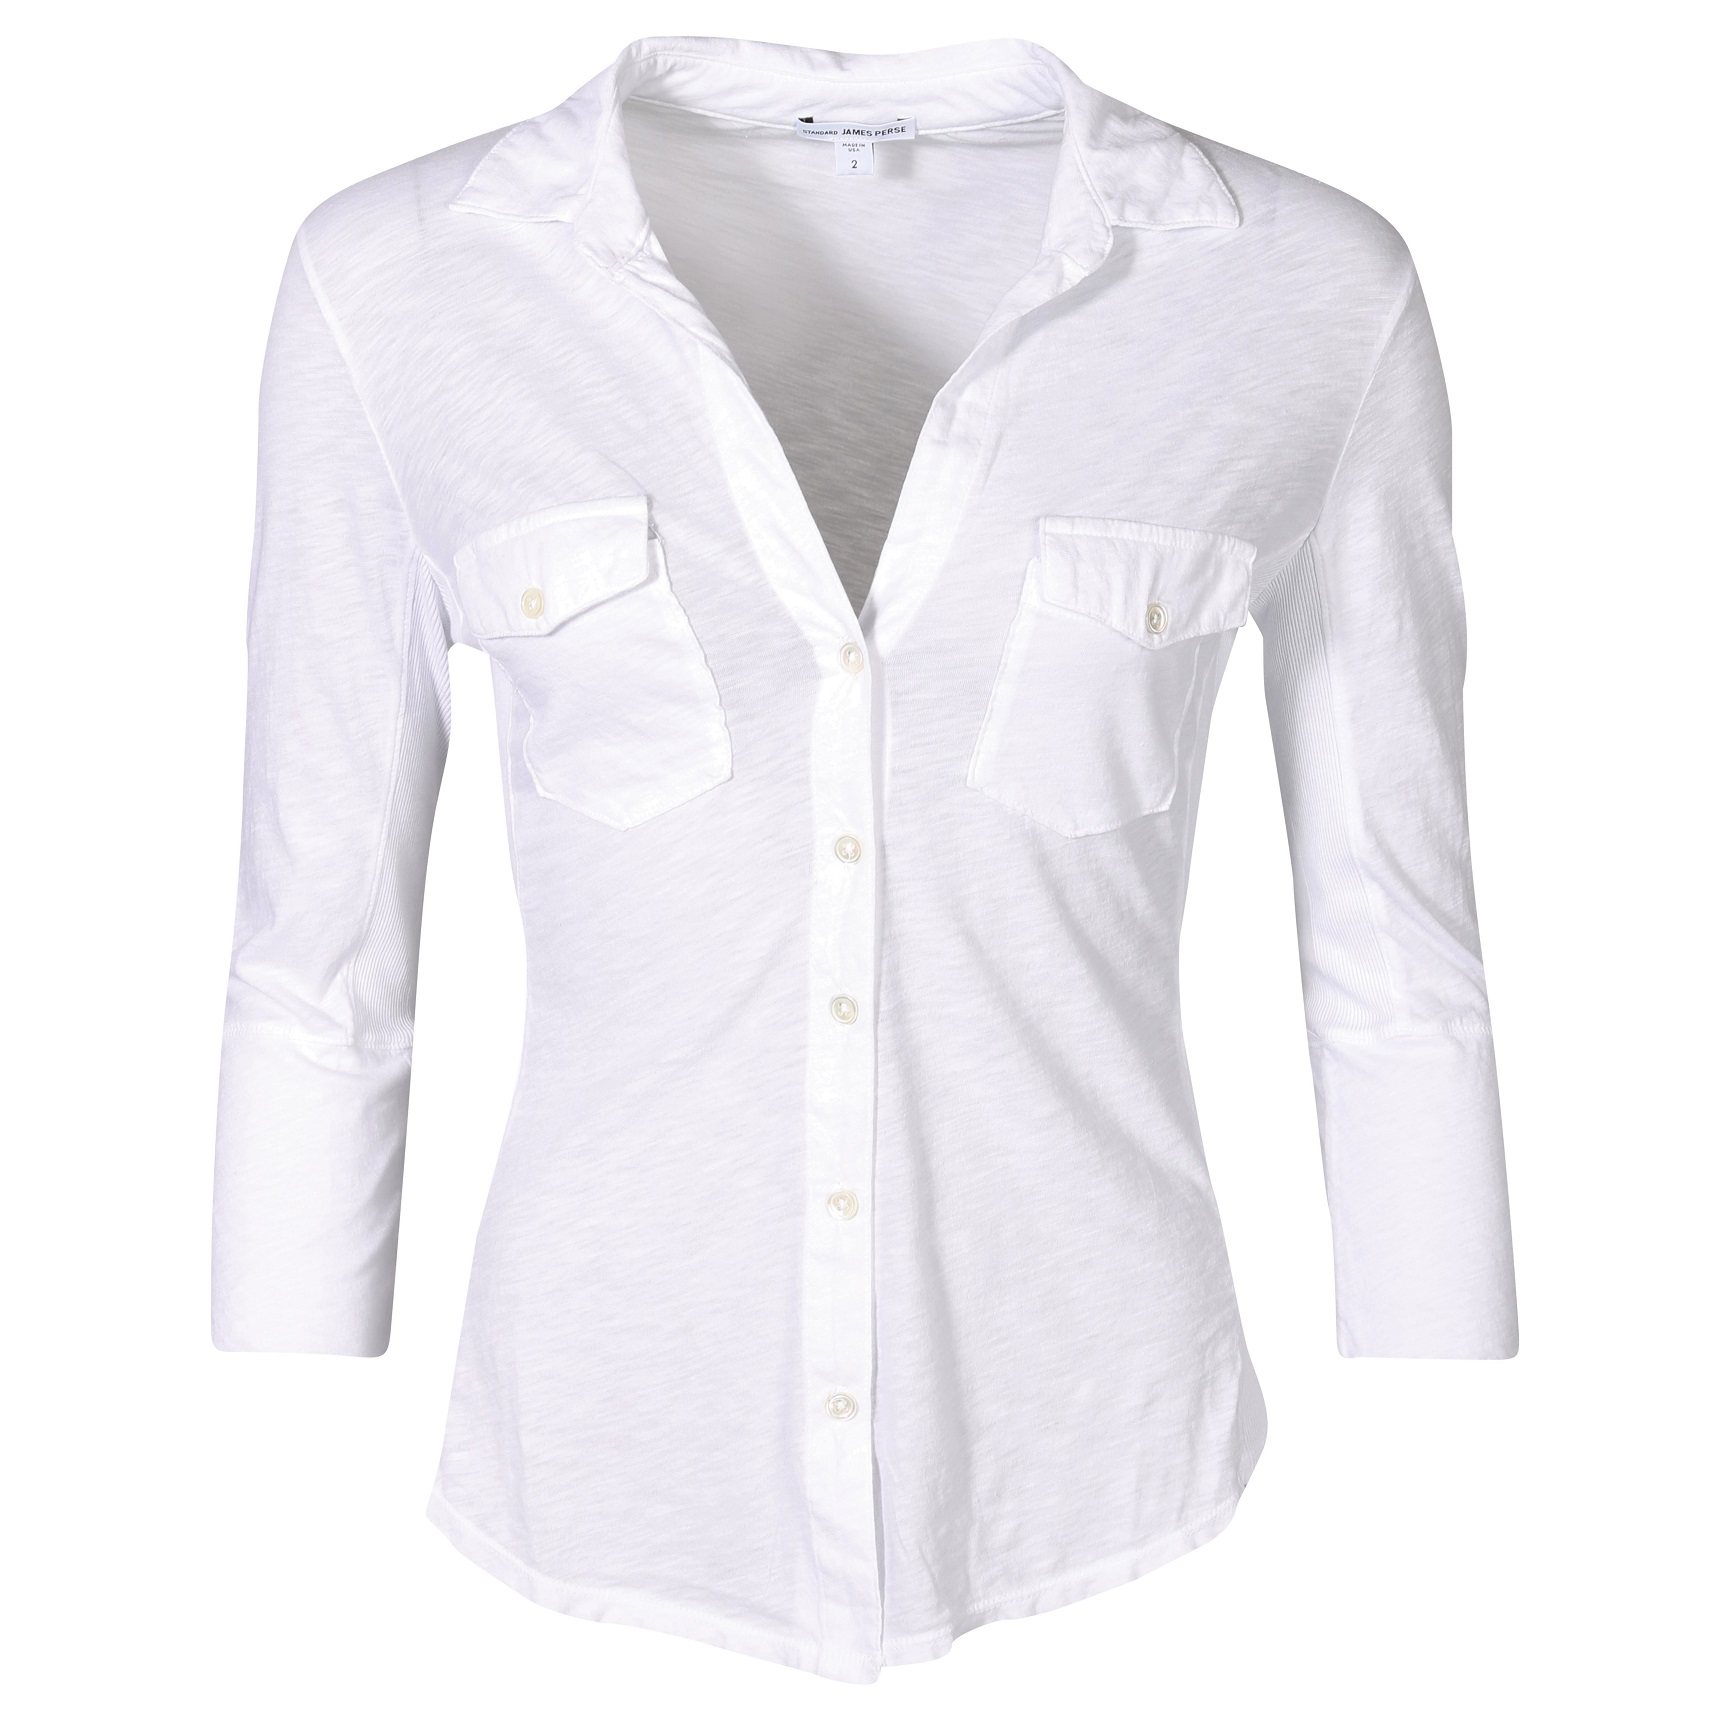 JAMES PERSE Contrast Panel Shirt in White 1/S